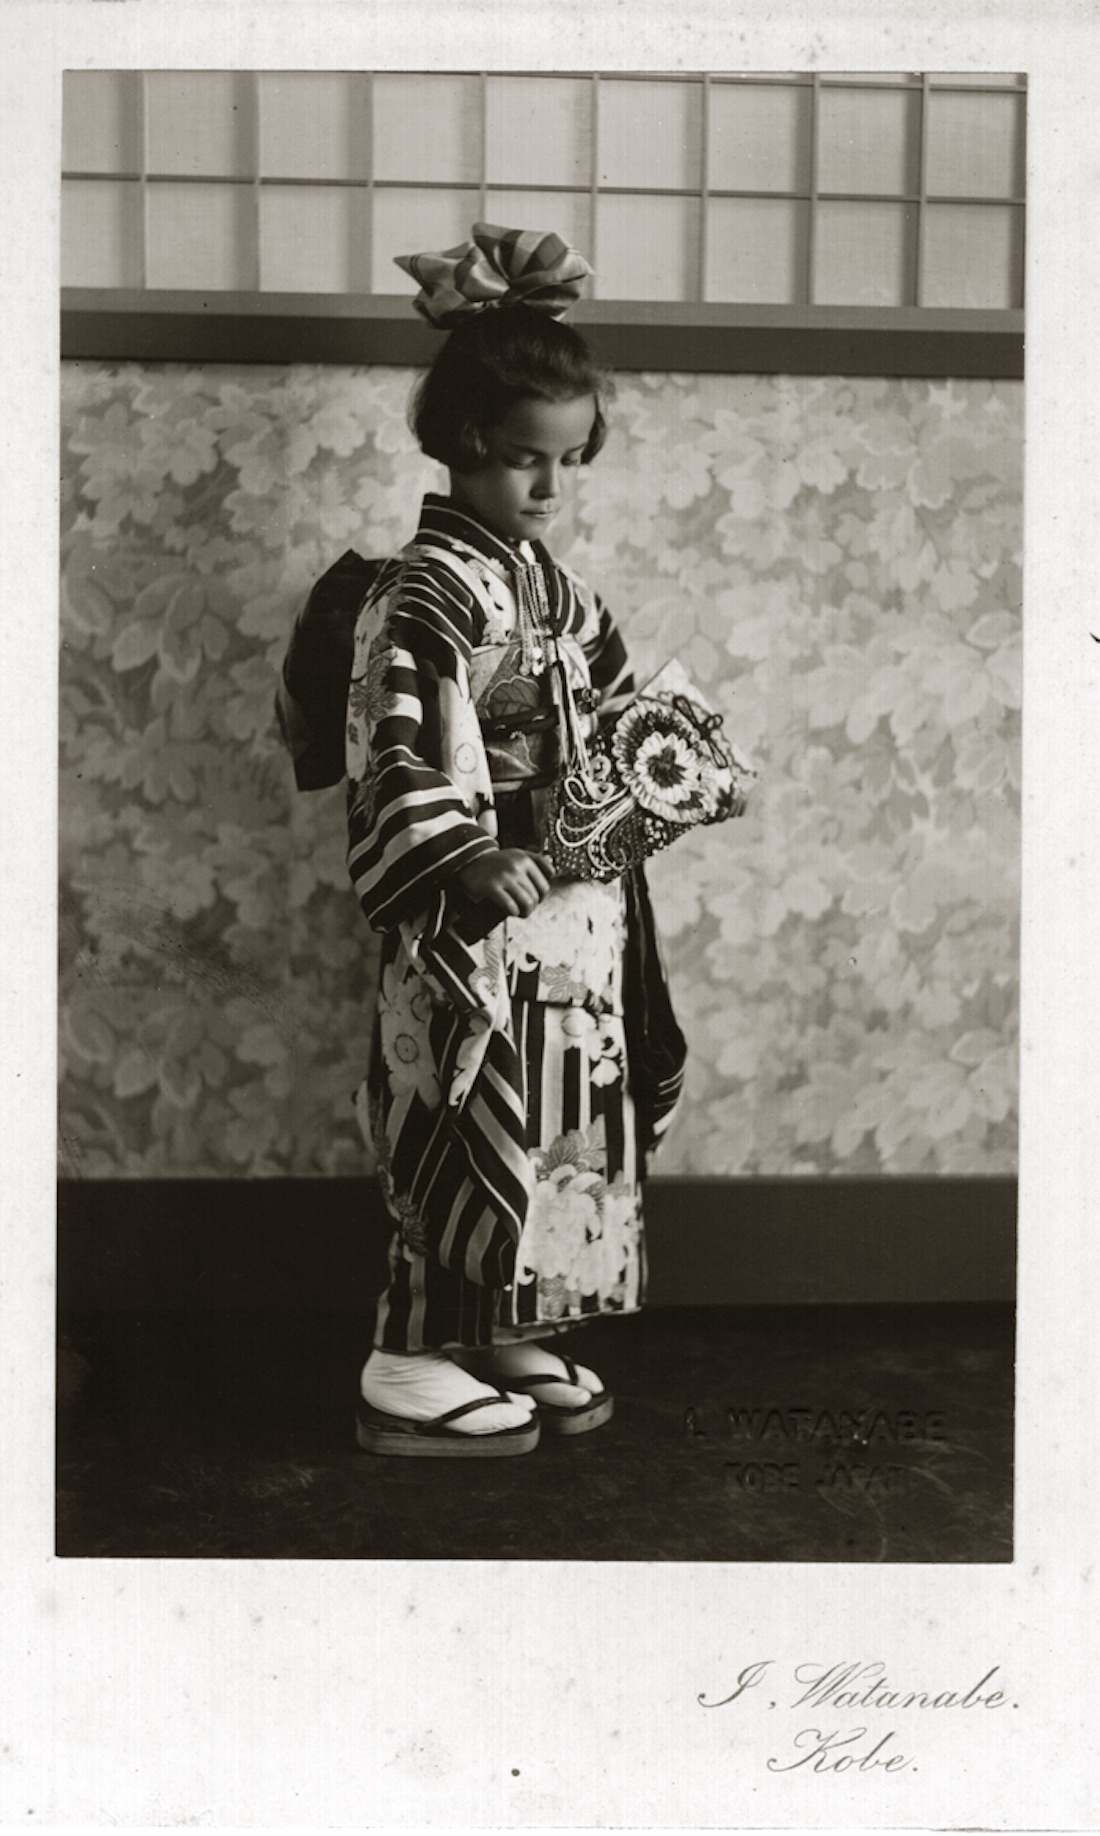 1926 photo of Lani’s mother, Aileen Helani, who was born in Japan in 1920.